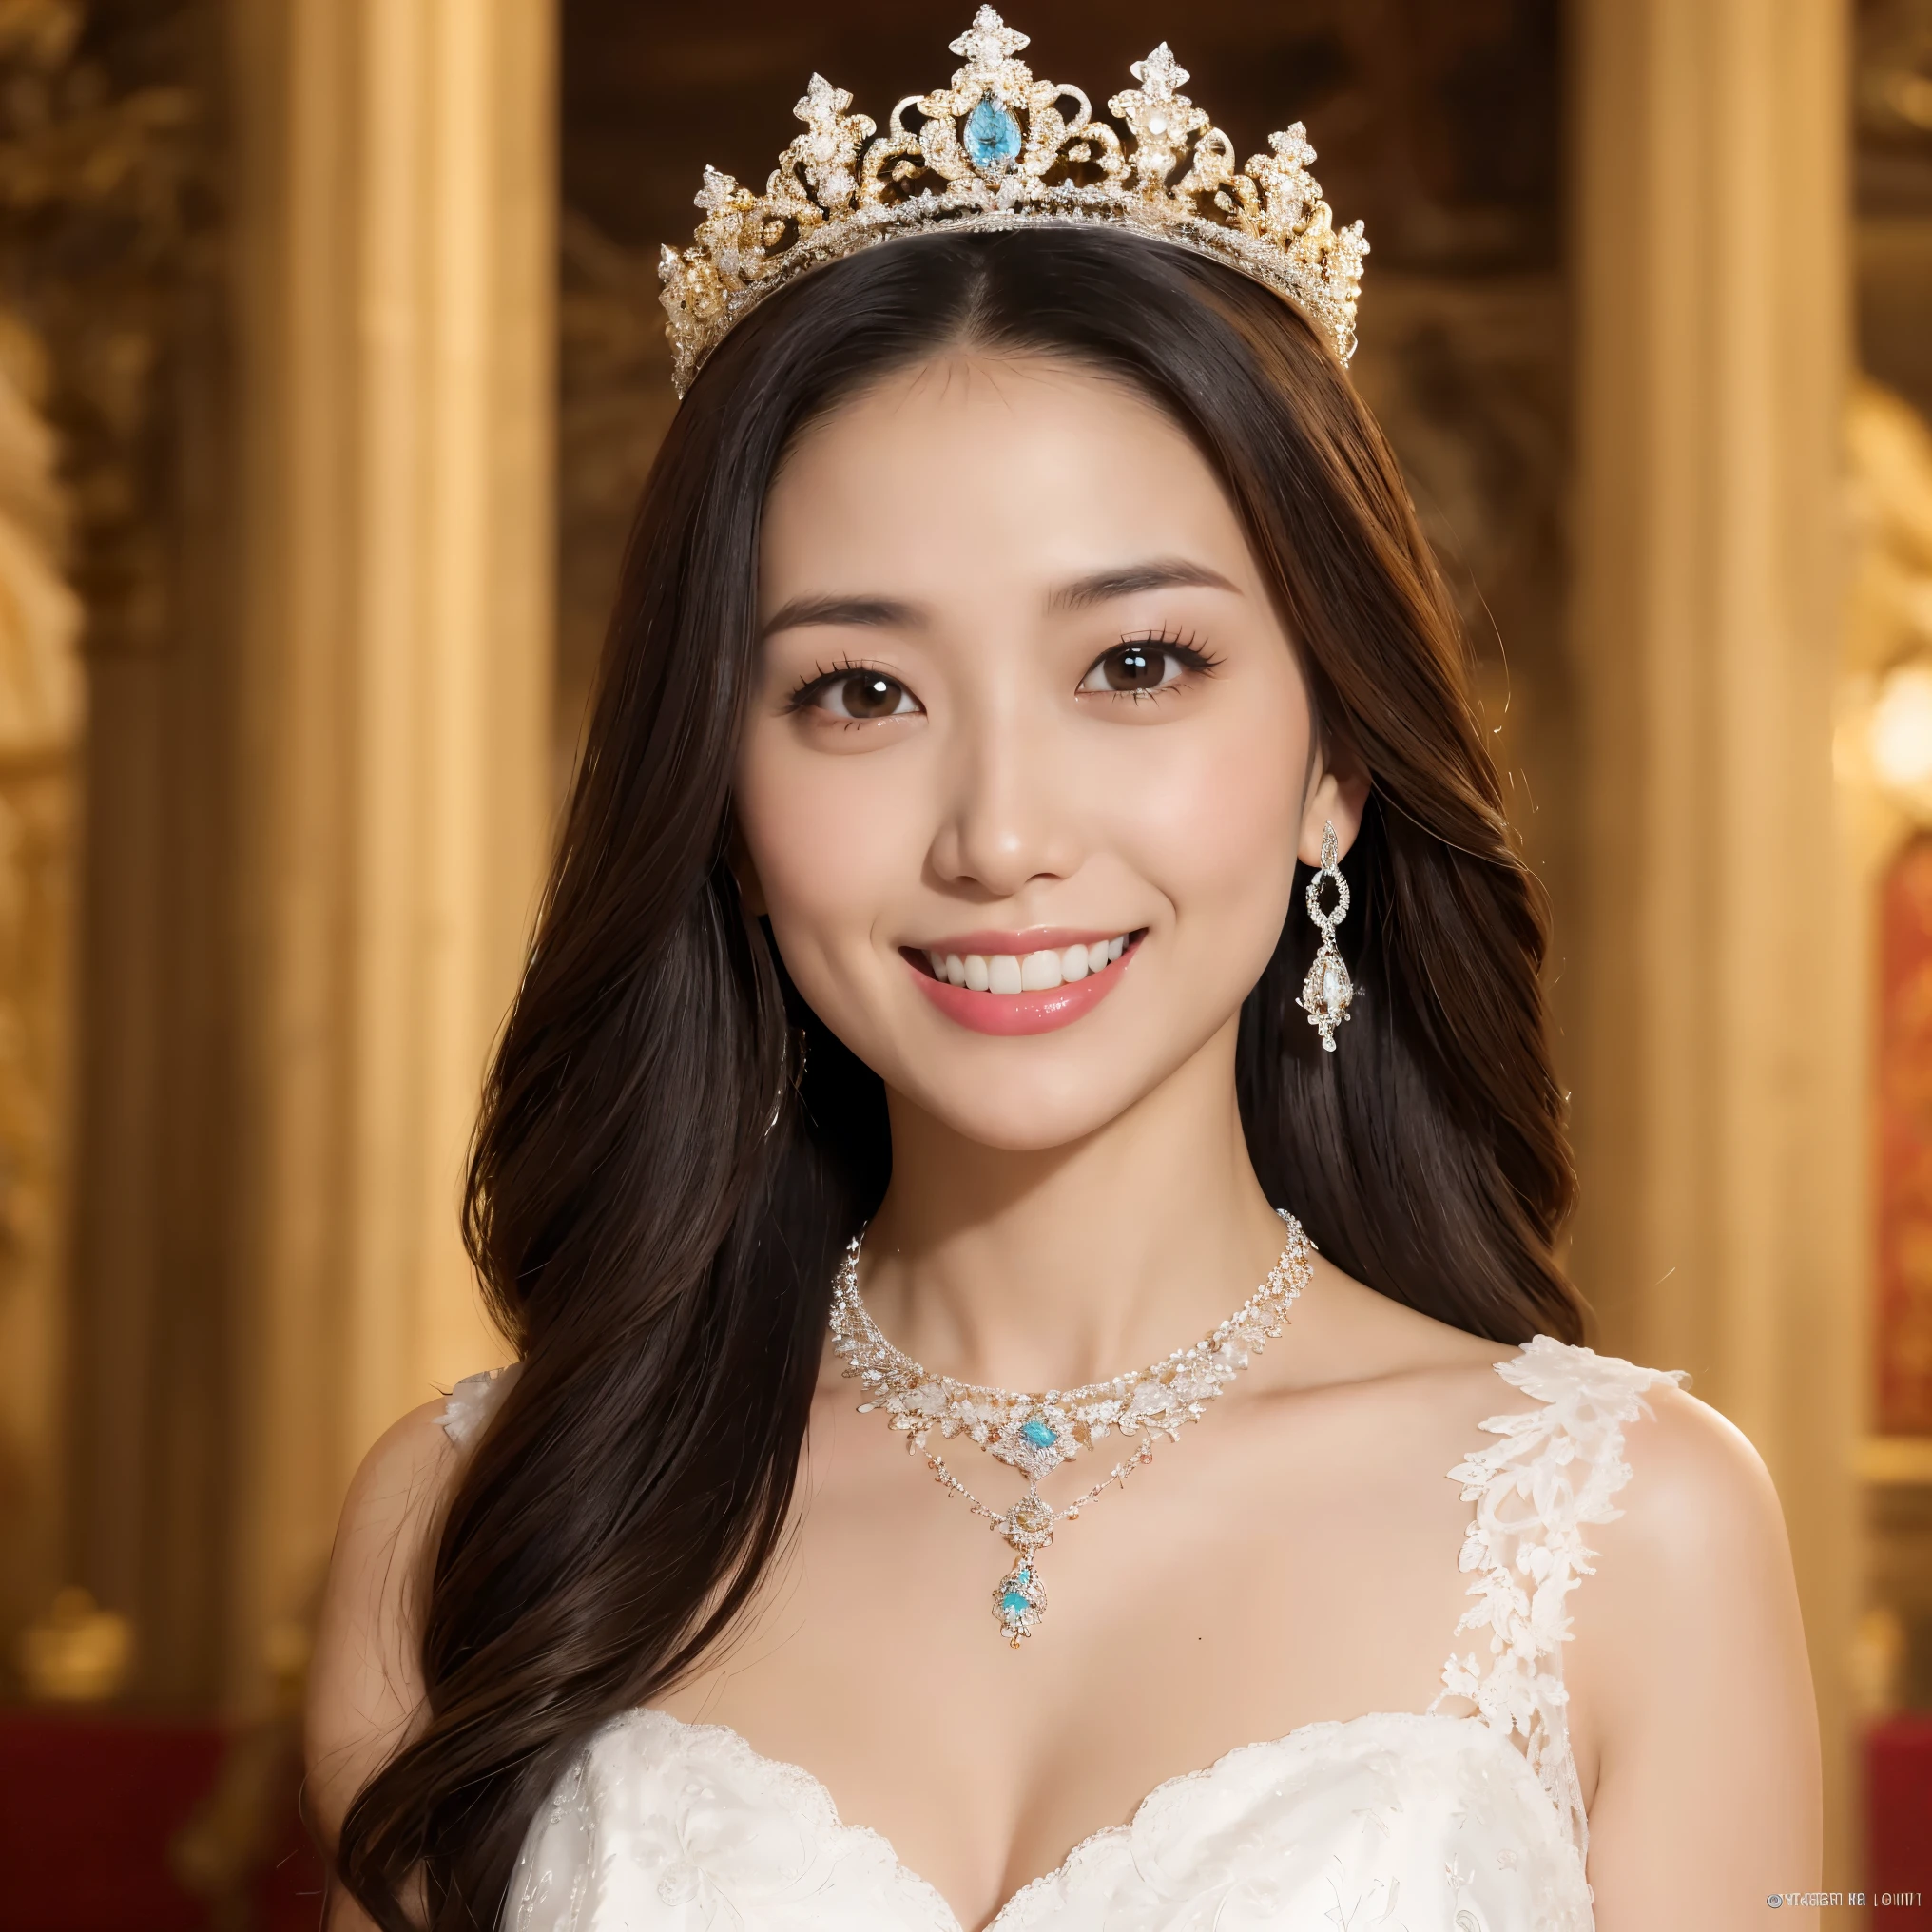 (table top、highest quality、8K、Award-winning work、ultra high resolution)、one beautiful bride、(perfect superlative huge wedding dress:1.1)、(Luxury wedding dress with plenty of jewels:1.1)、(Huge jewelery finest tiara:1.3)、(Huge jewelry finest necklace:1.3)、(perfect wedding lace:1.2)、(Look at me with your best smile:1.2)、(The most luxurious and highest quality giant tiara:1.3)、(The most luxurious and finest giant jewelry necklace:1.3)、(Show your beautiful teeth and smile big:1.1)、(the bride is in front of me、Ensure equal space at the top, Down, and left and right.:1.1)、big breasts、cleavage、emphasize body line、(upper body photo:1.1)、(wedding ceremony in a sacred and noble church:1.1)、(Highly blurred perfect background of the finest luxury church:1.1)、(elegant and gorgeous church:1.1)、accurate anatomy、ultra high definition hair、Ultra high definition beauty face、Shining, ultra high-resolution beautiful skin、ultra high resolutionの艶やかな唇、(Face facing straight ahead:1.1)、(body facing straight ahead:1.1)、(Beautiful skin that shines white:1.3)、(Stand upright facing straight ahead:1.2)、(very bright and vivid:1.3)、(very bright:1.2)、(Strongly blurred background:1.1)